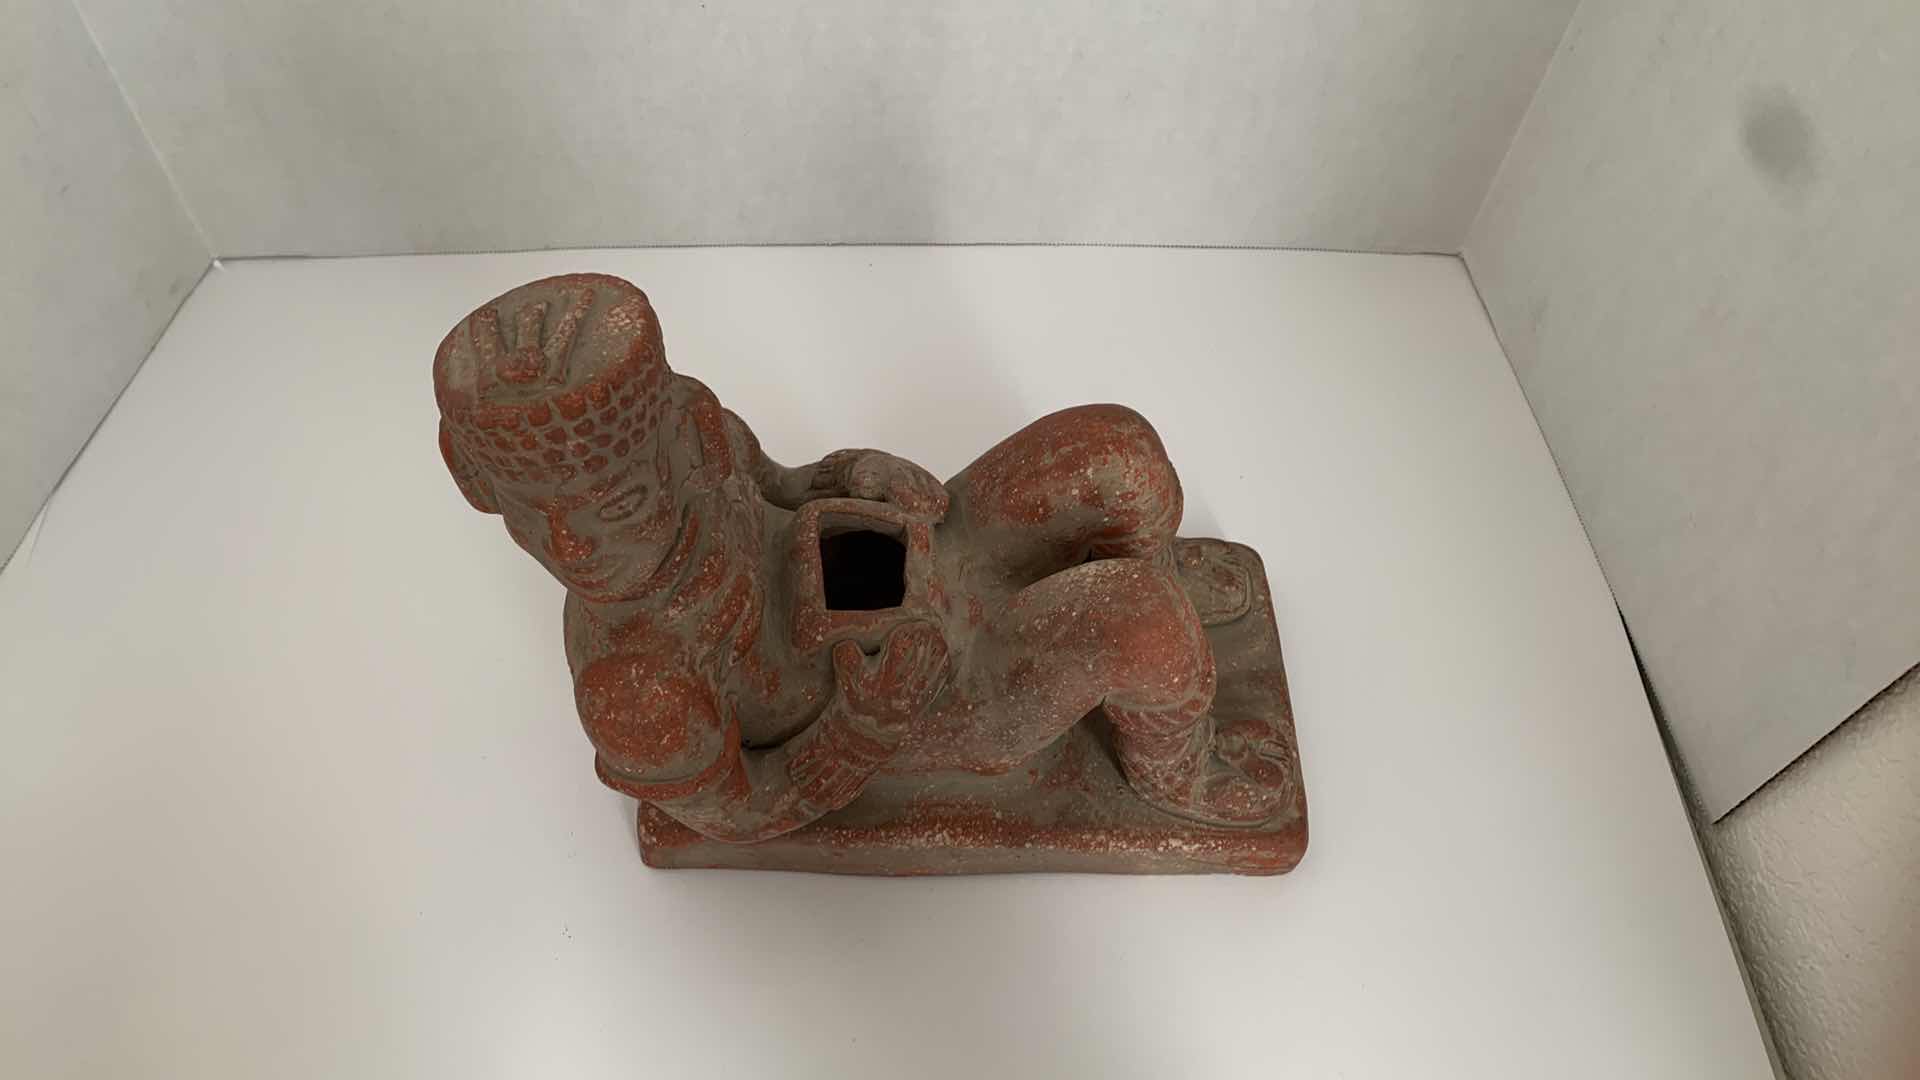 Photo 3 of REPLICA CHACMOOL CLAY STATUE 10” X 5” H 9”